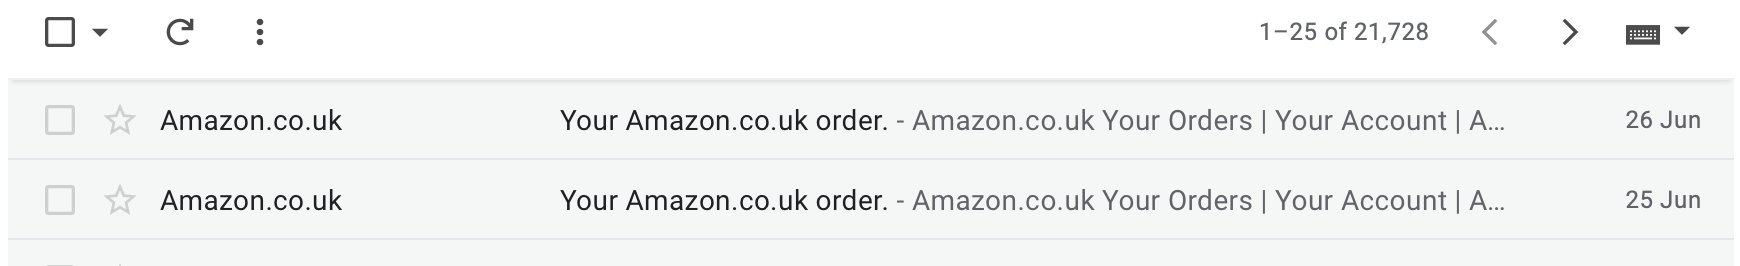 An example of missing pre-header from Amazon